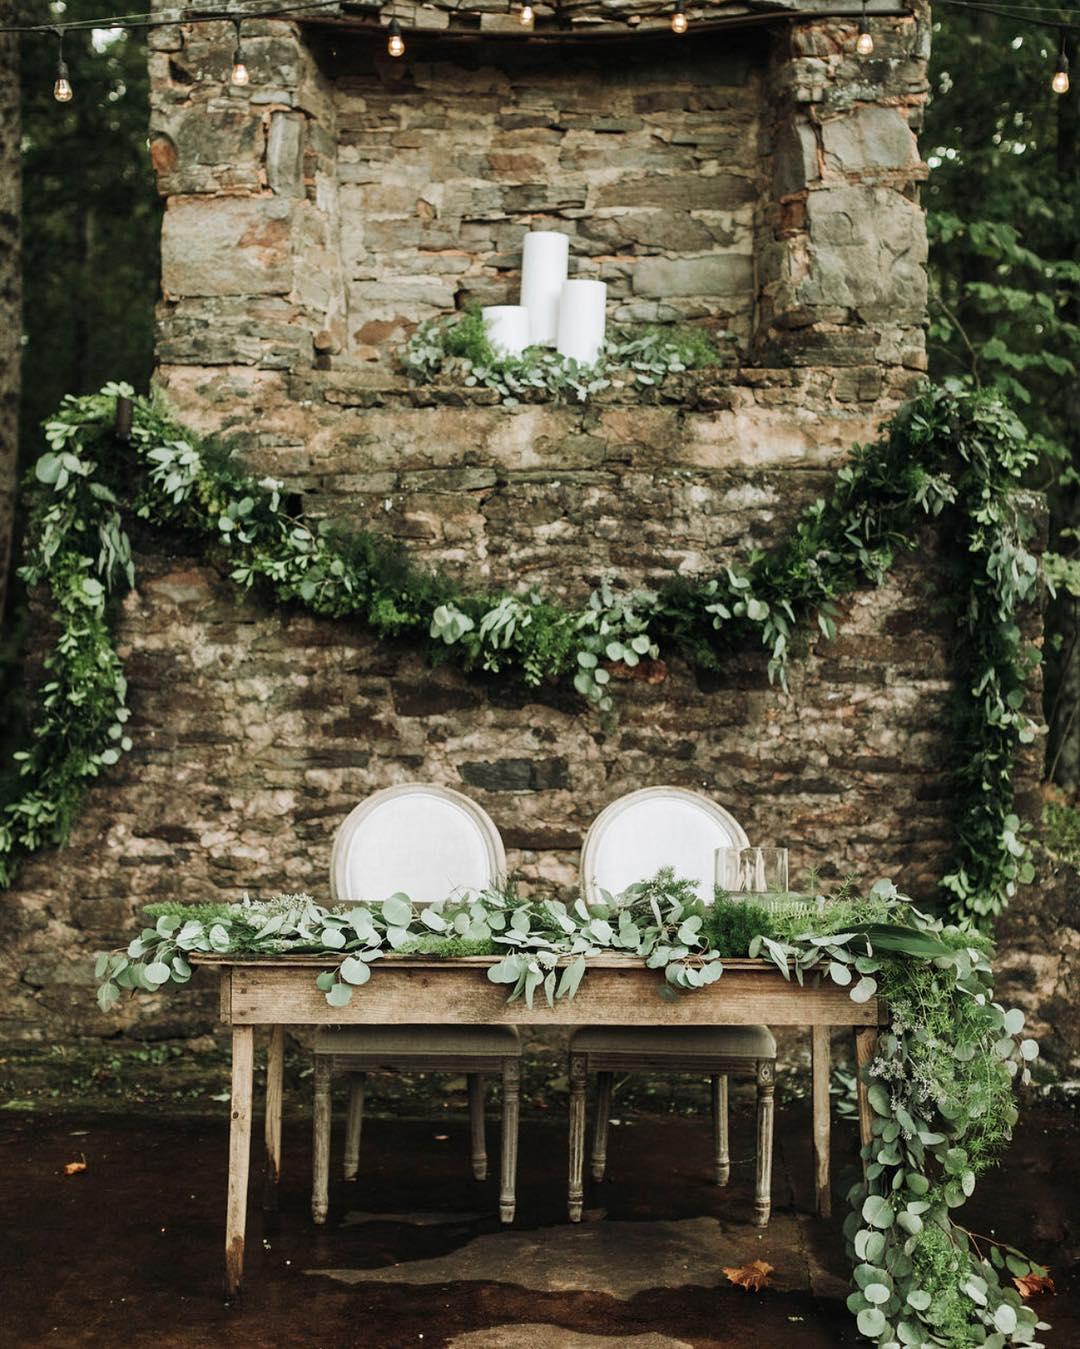 36 Of Georgia S Most Gorgeous Wedding Venues